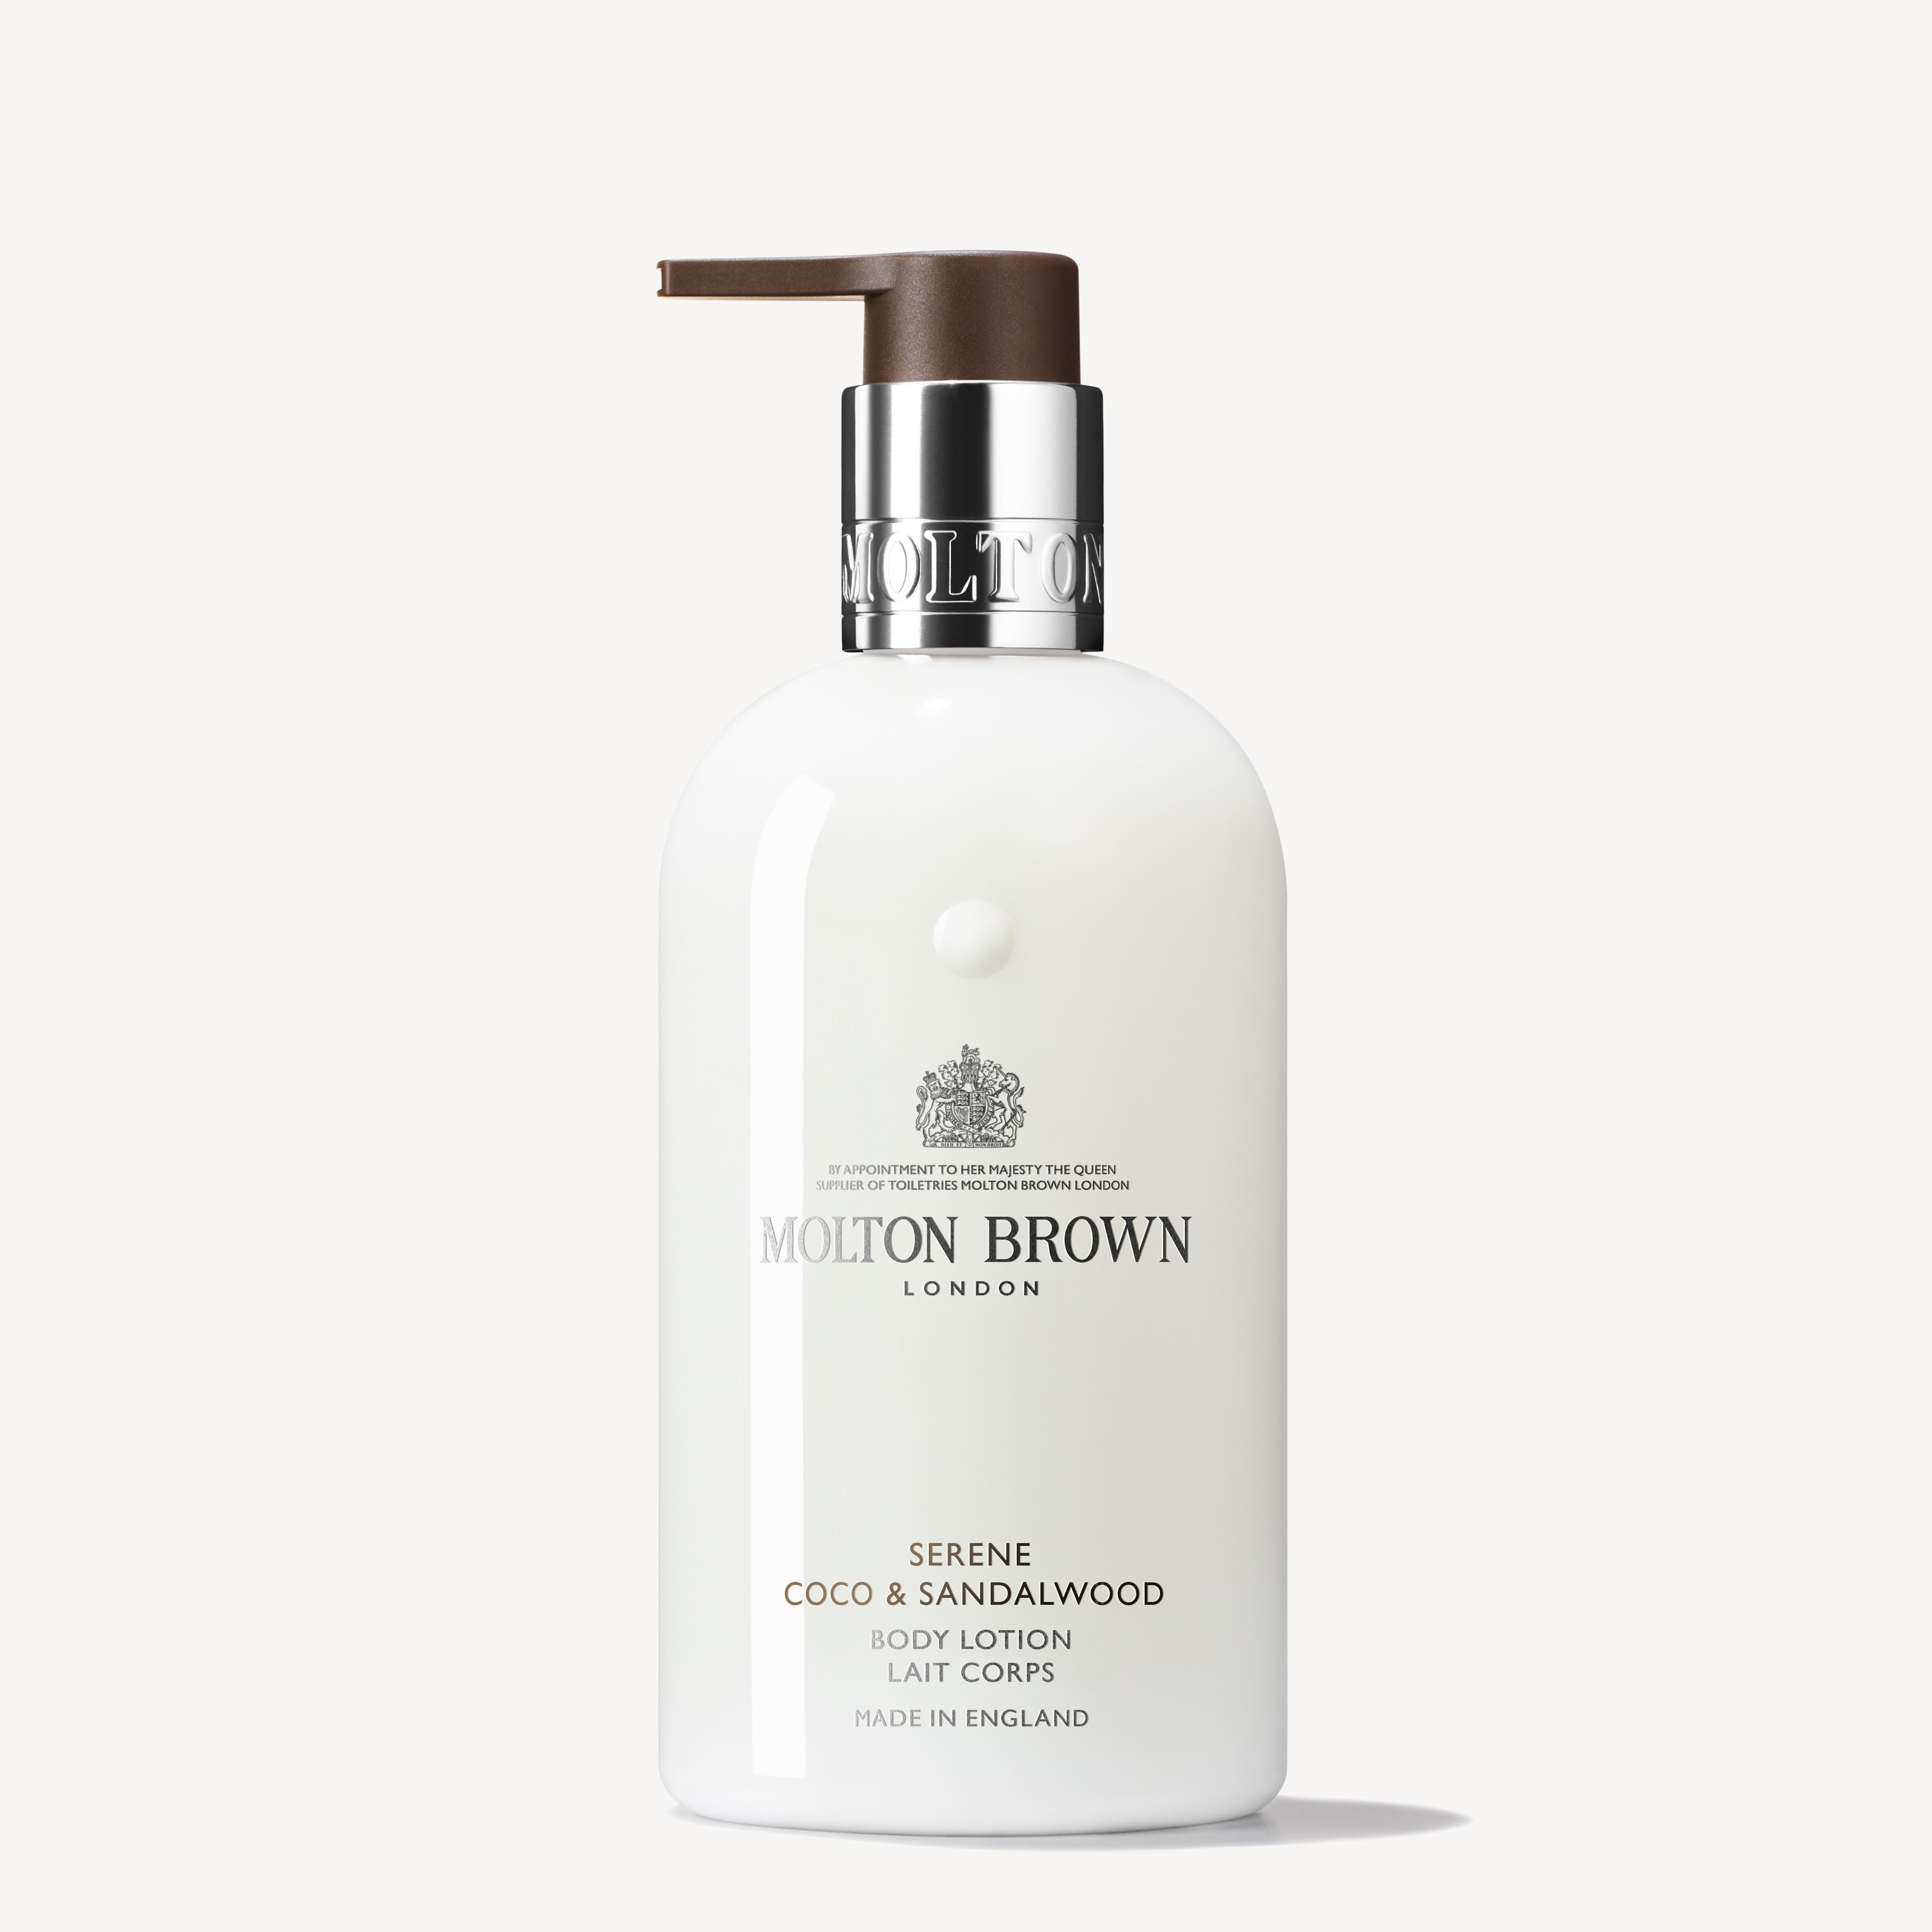 Molton Brown OUTLET Serene Coco & Sandalwood Body Lotion 300ml